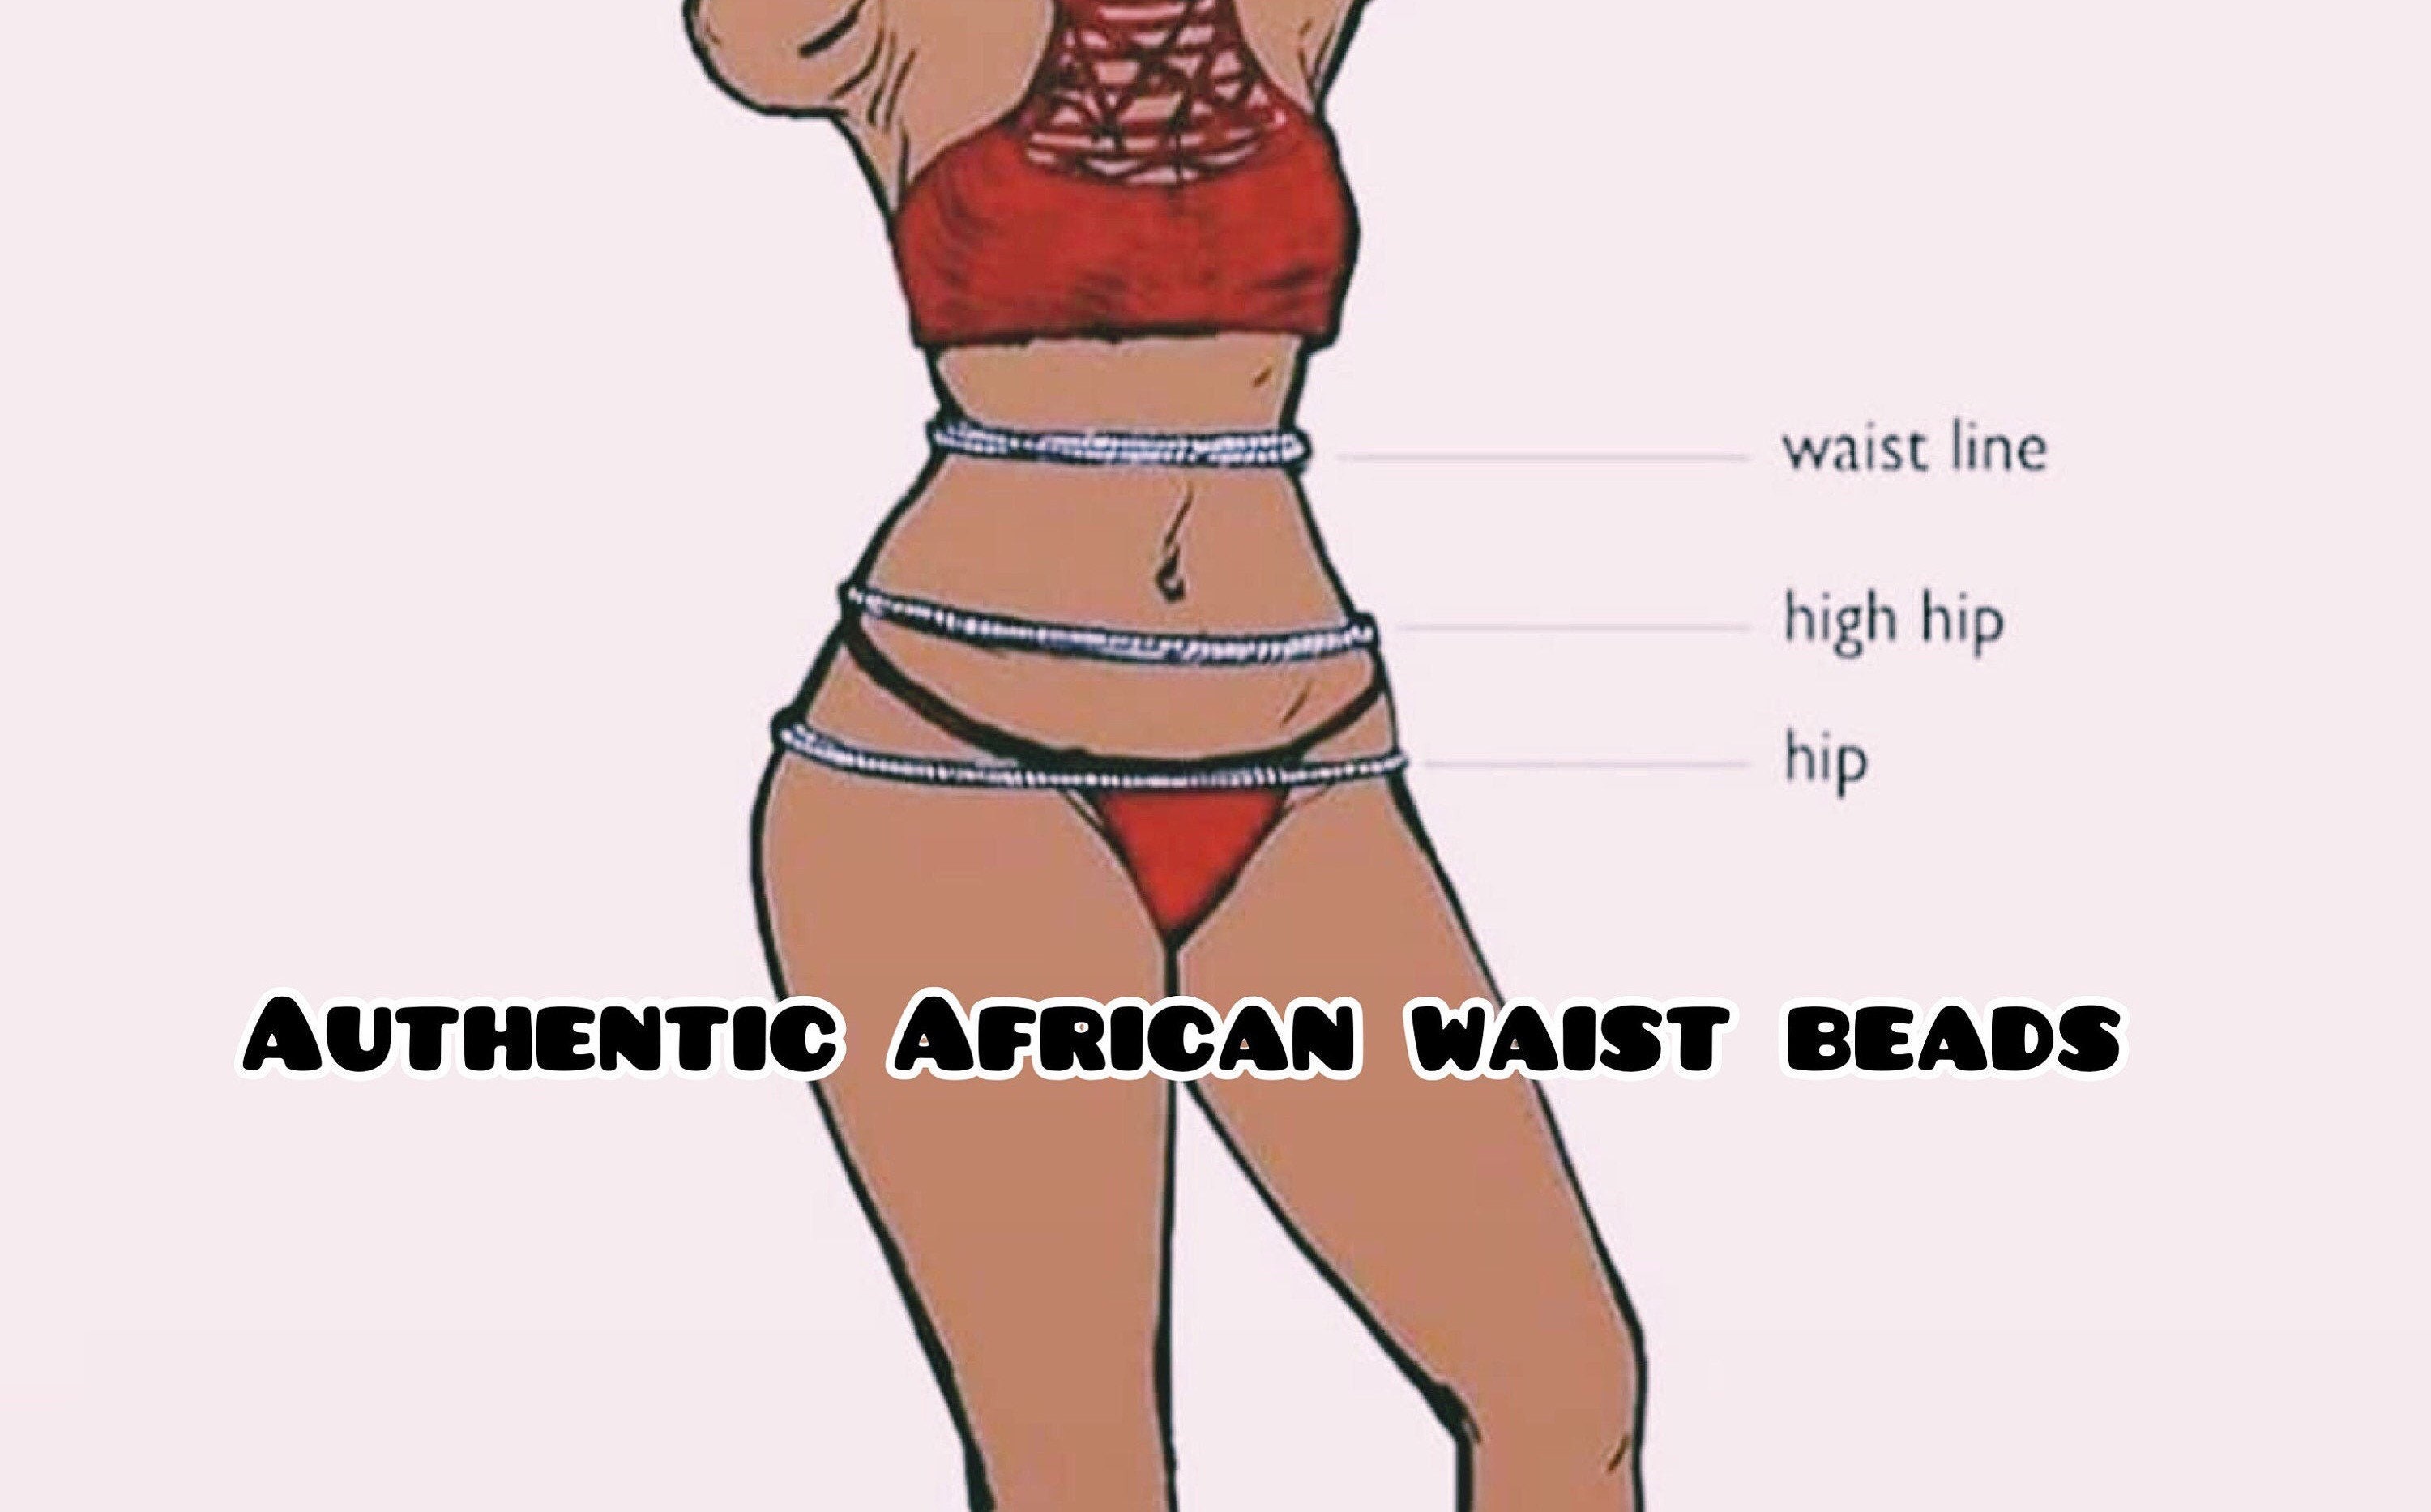 How to Use Waist Beads For Weight Loss - Modern Natured